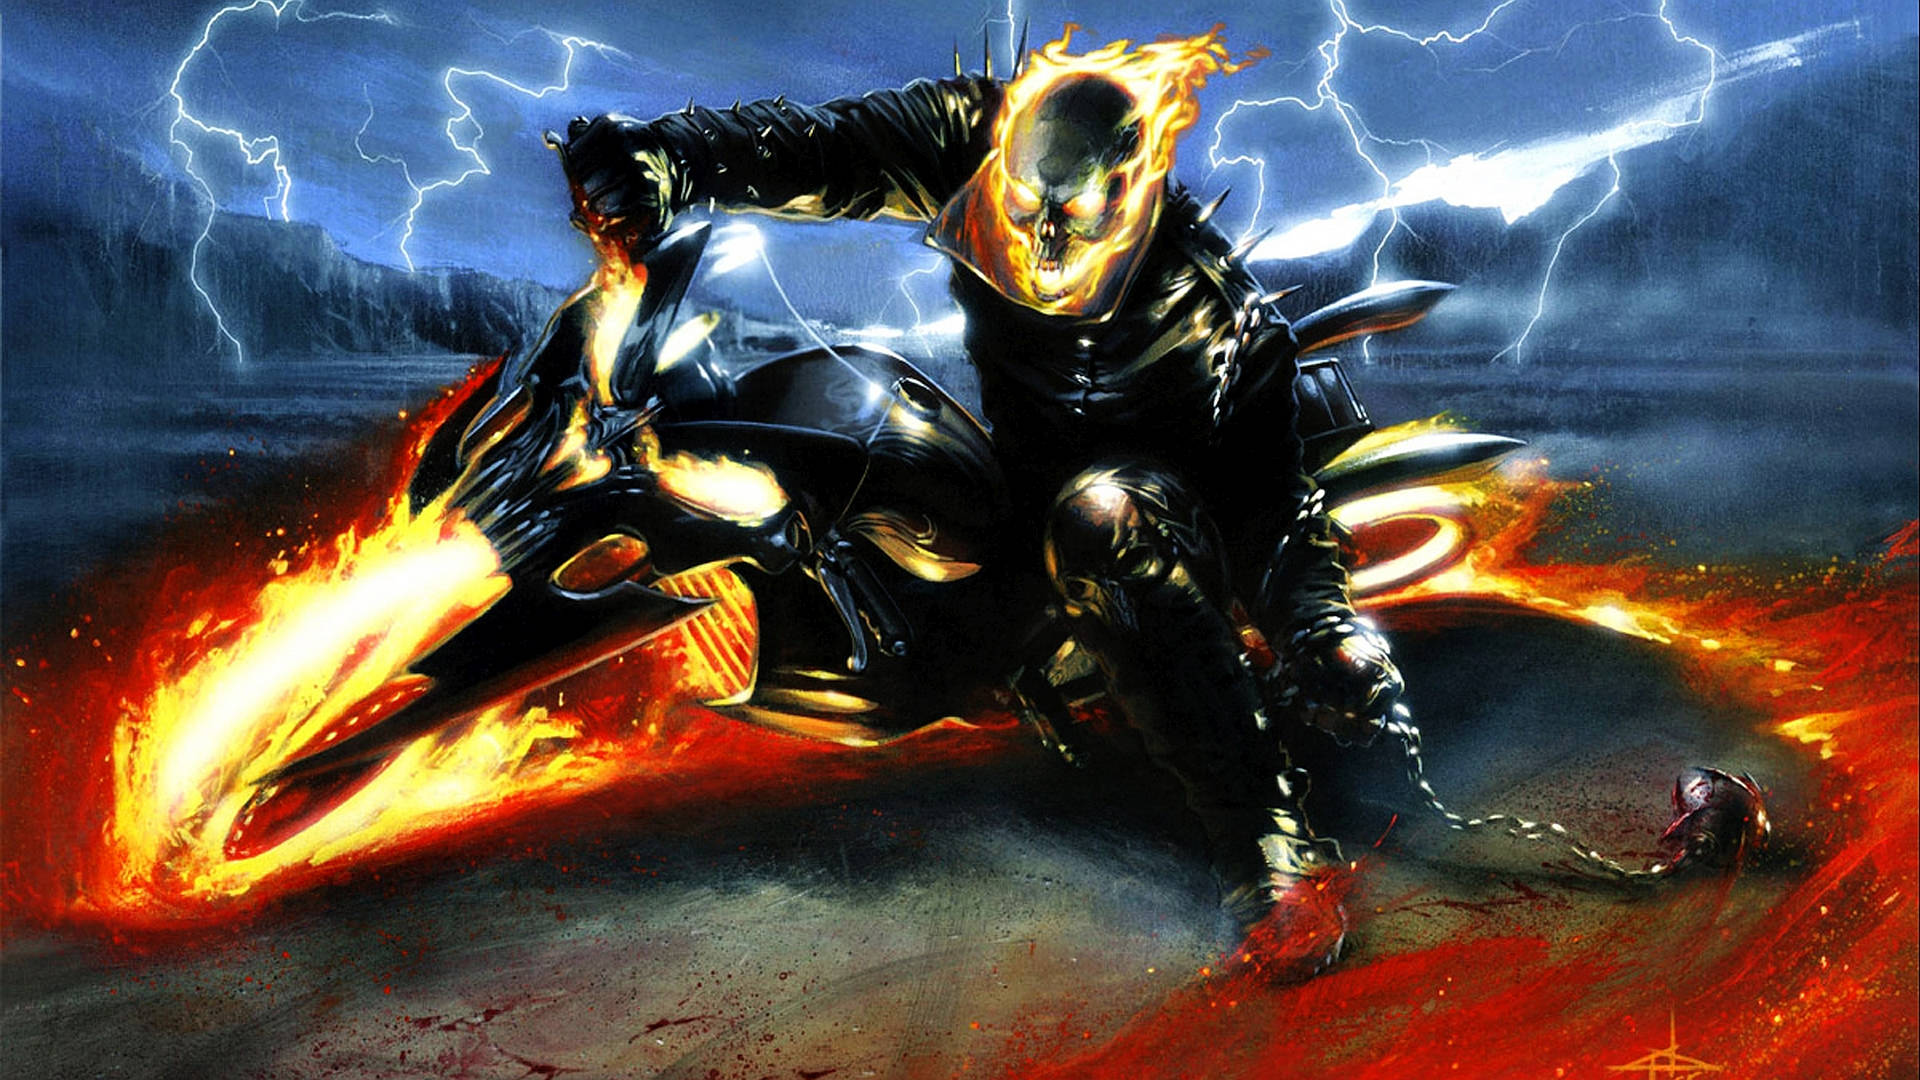 Easy Rider Motorbike With Flame